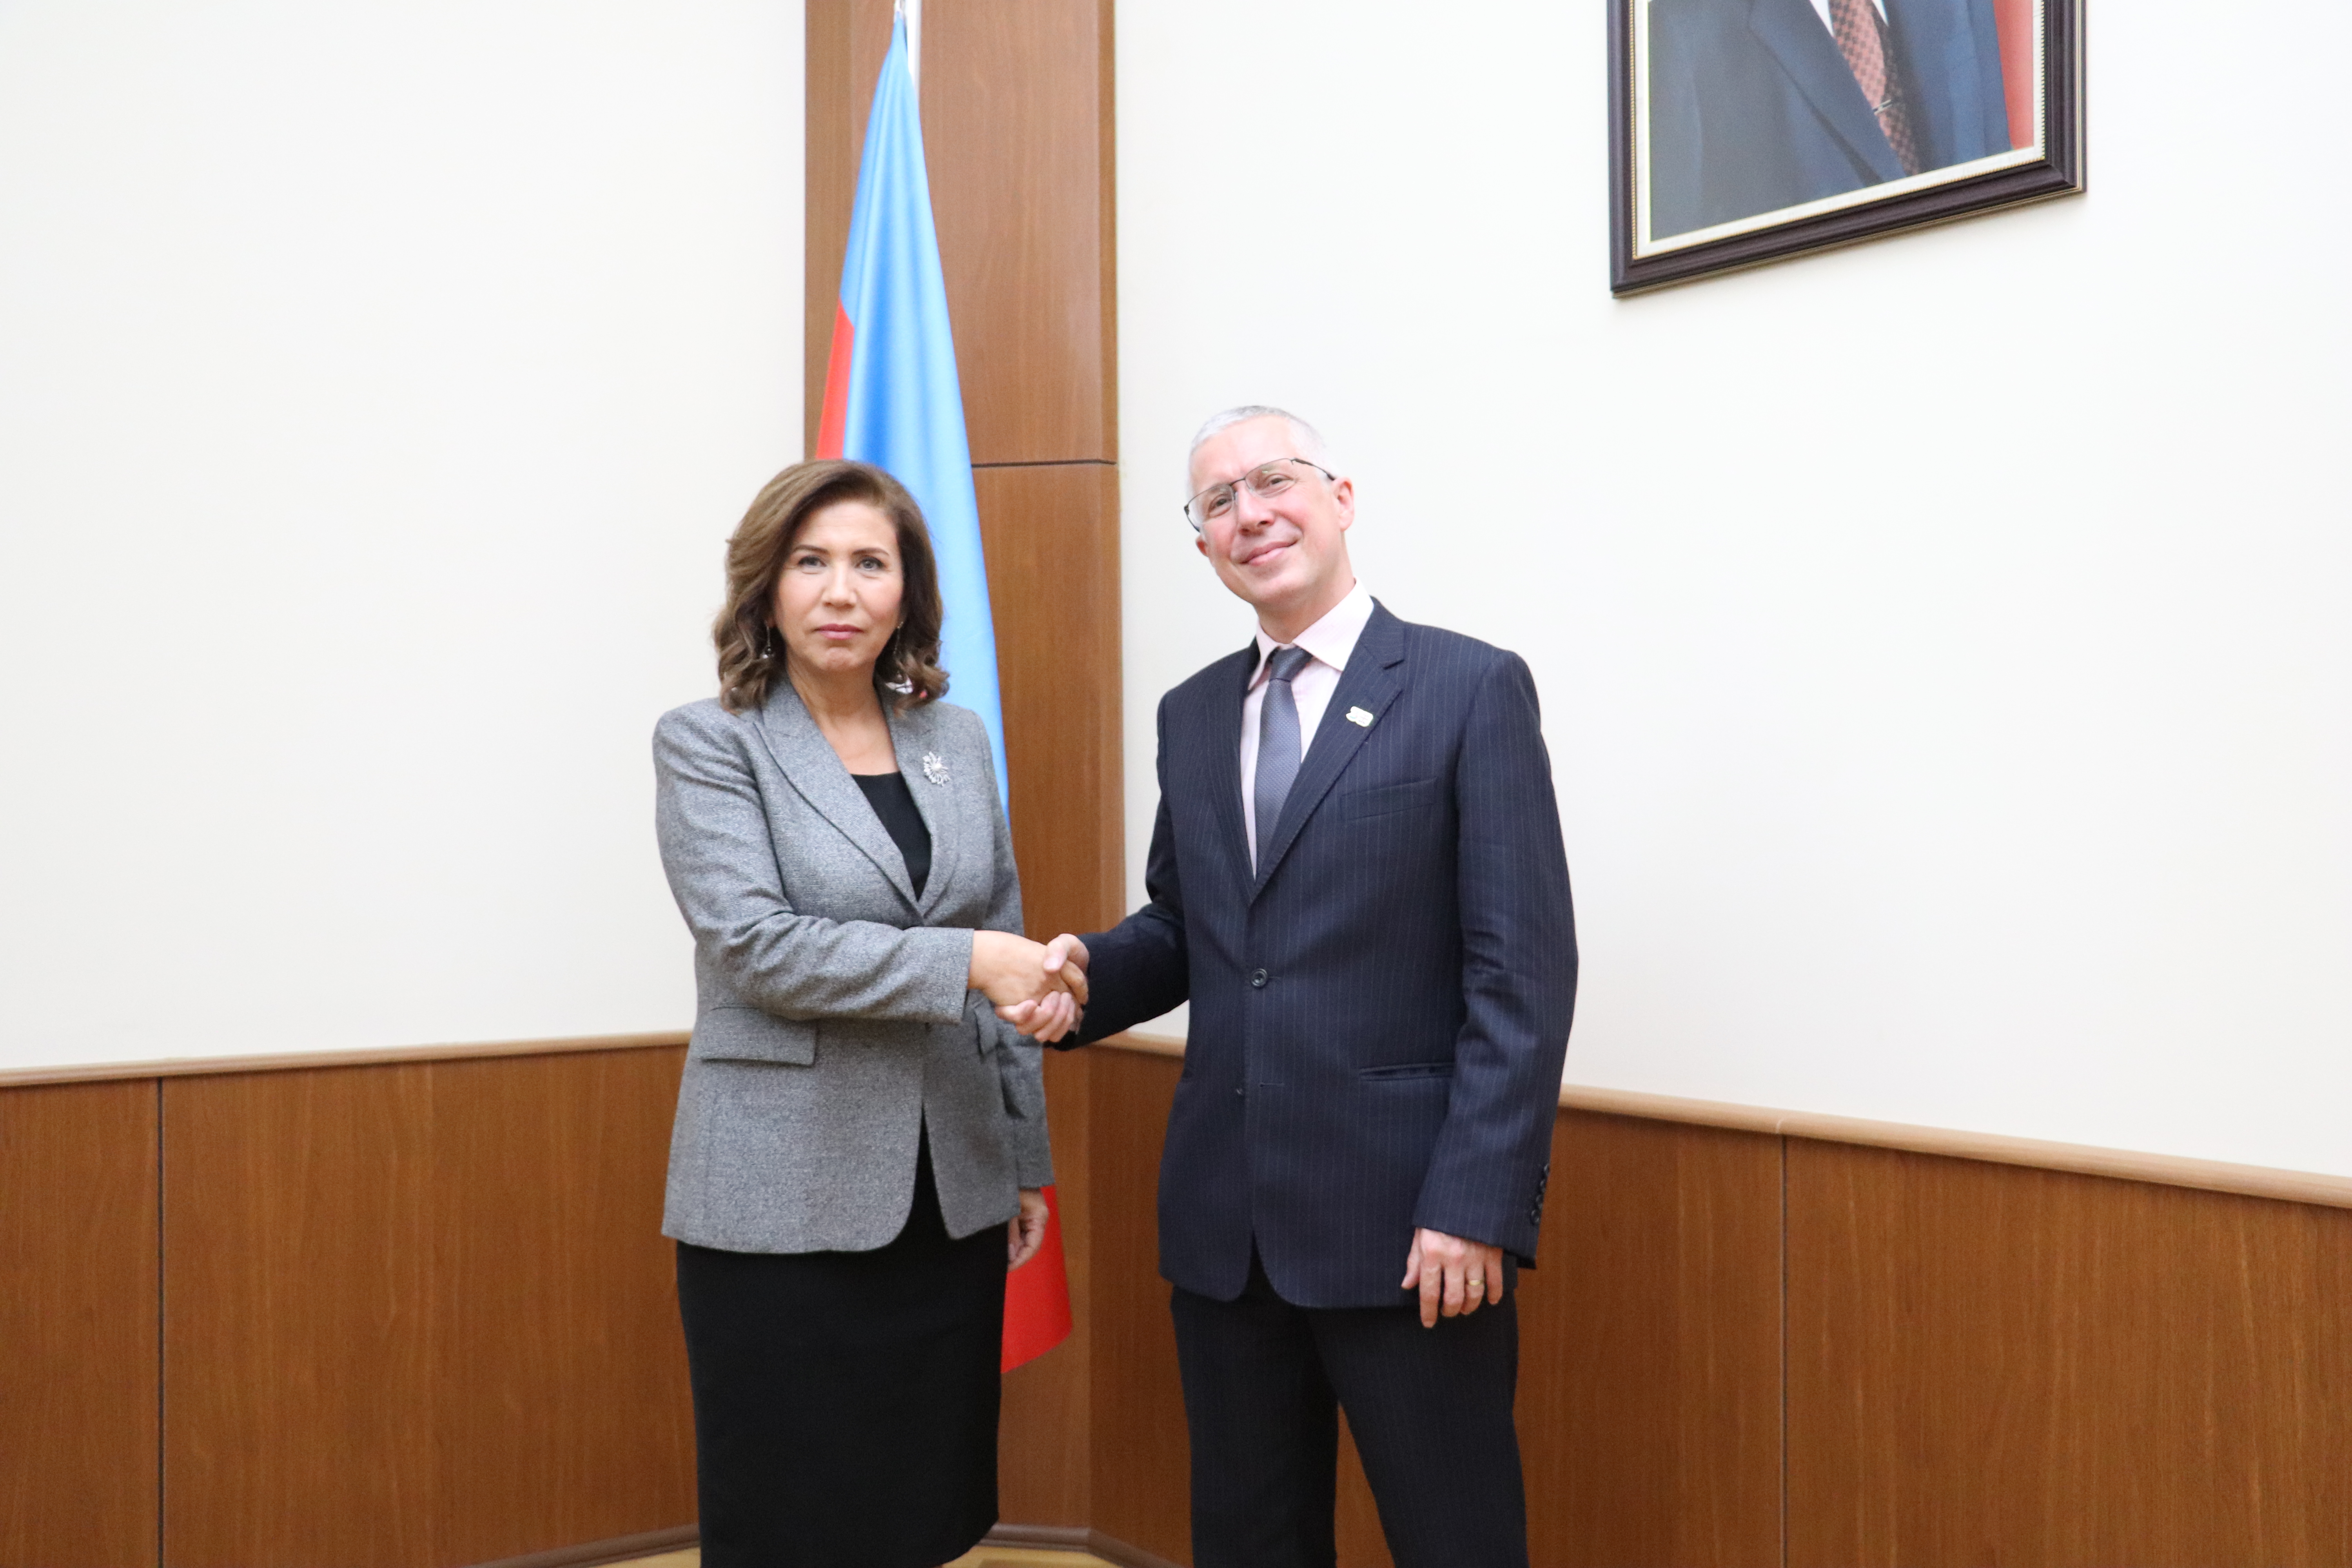 The Chairperson of the State Committee met with the newly appointed British Ambassador to Azerbaijan